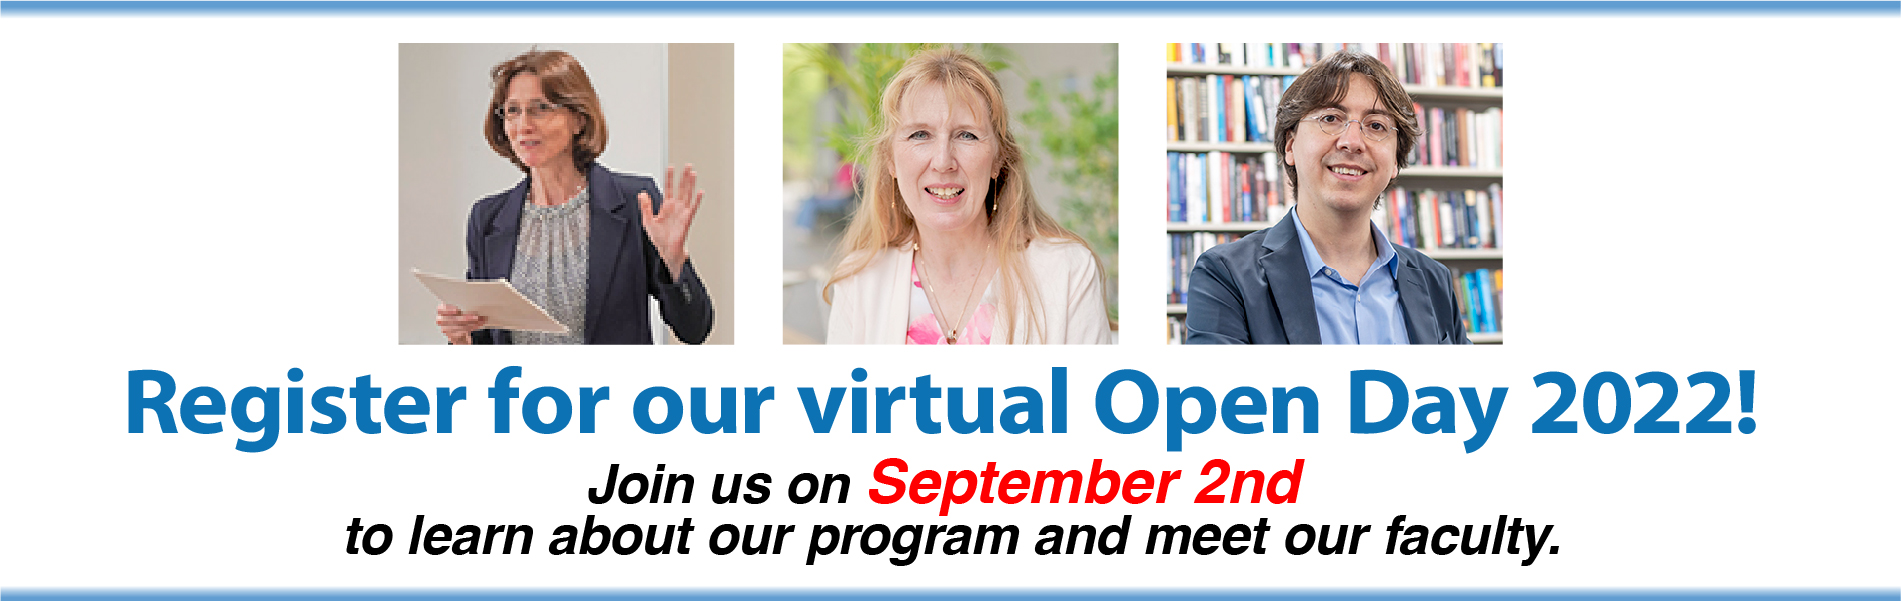 Virtual Open Day 2022 on September 2nd!